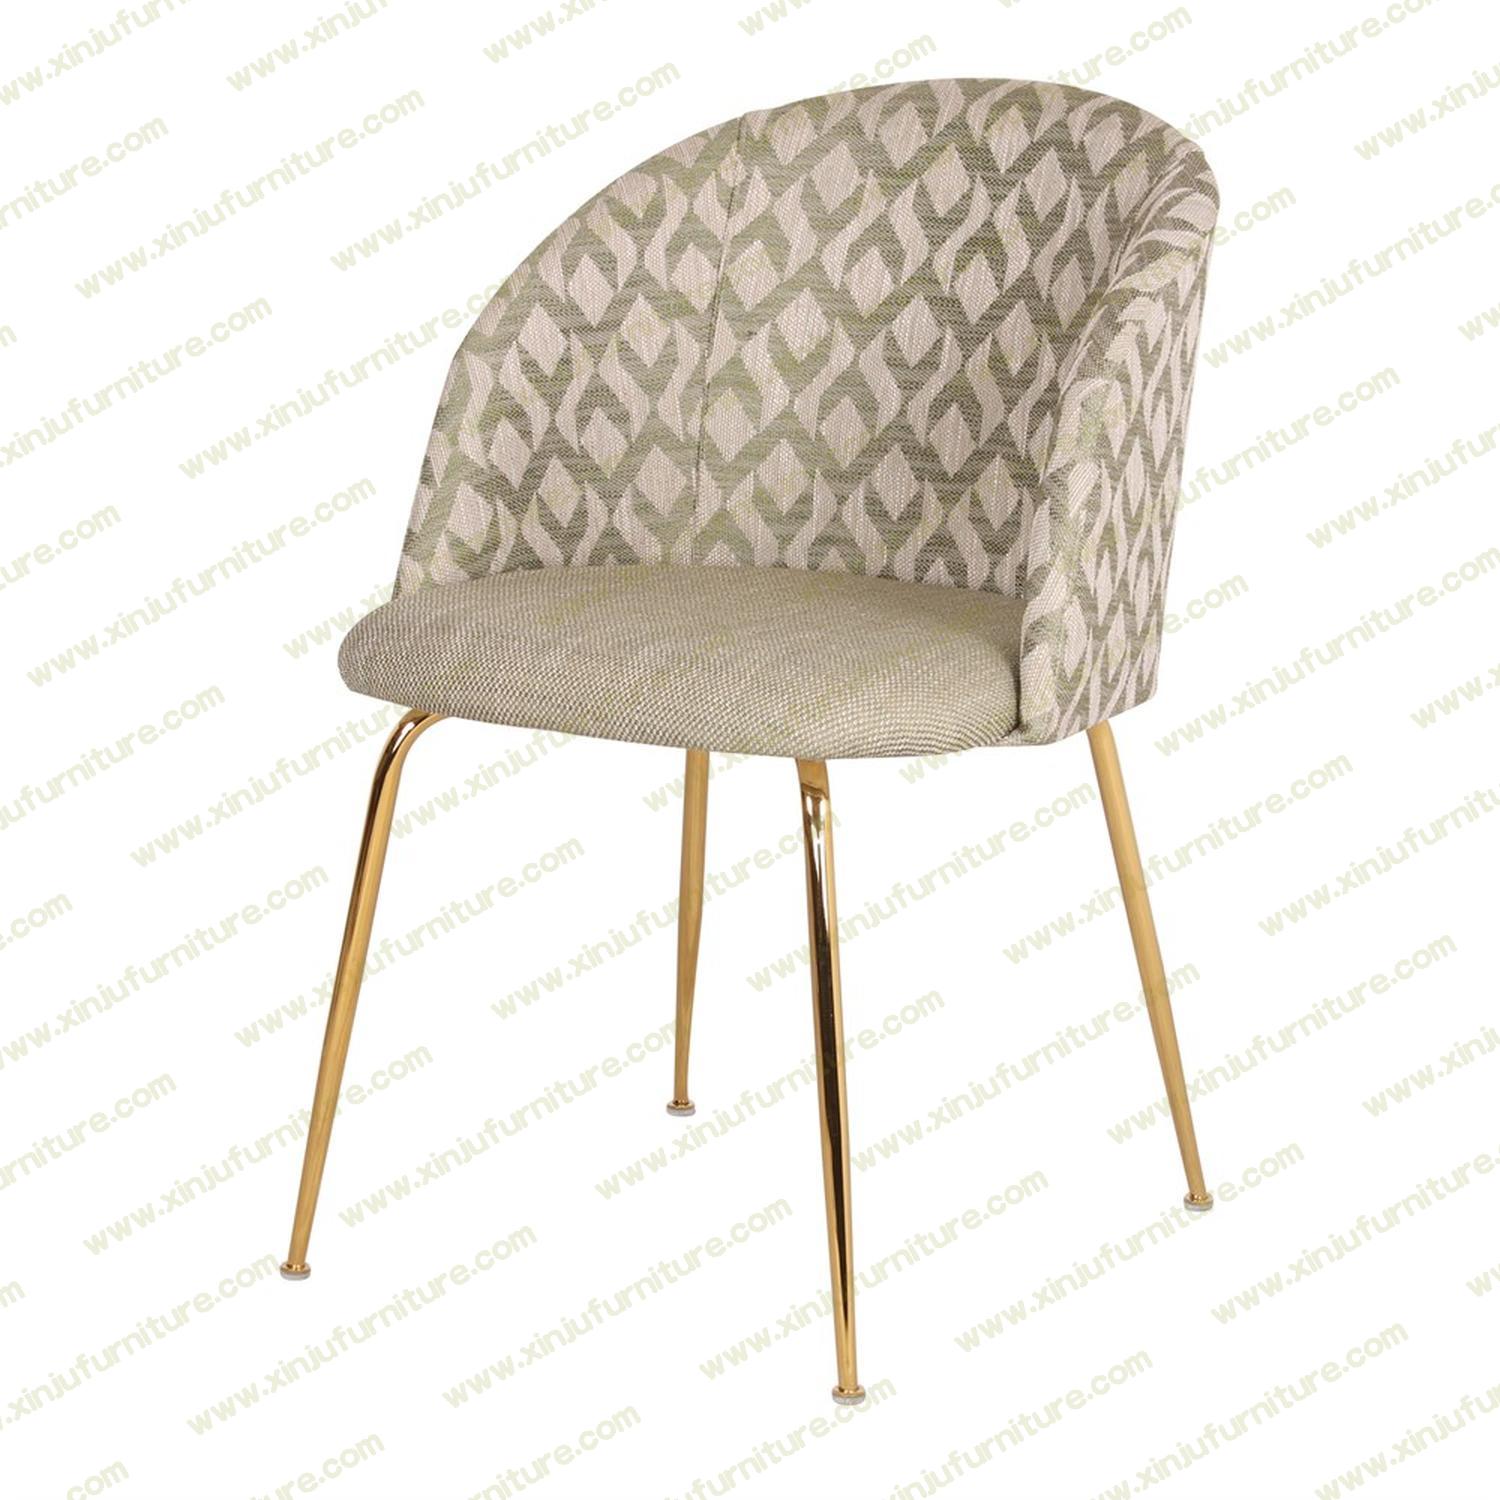 Dining chair of cotton linen cloth Restaurant